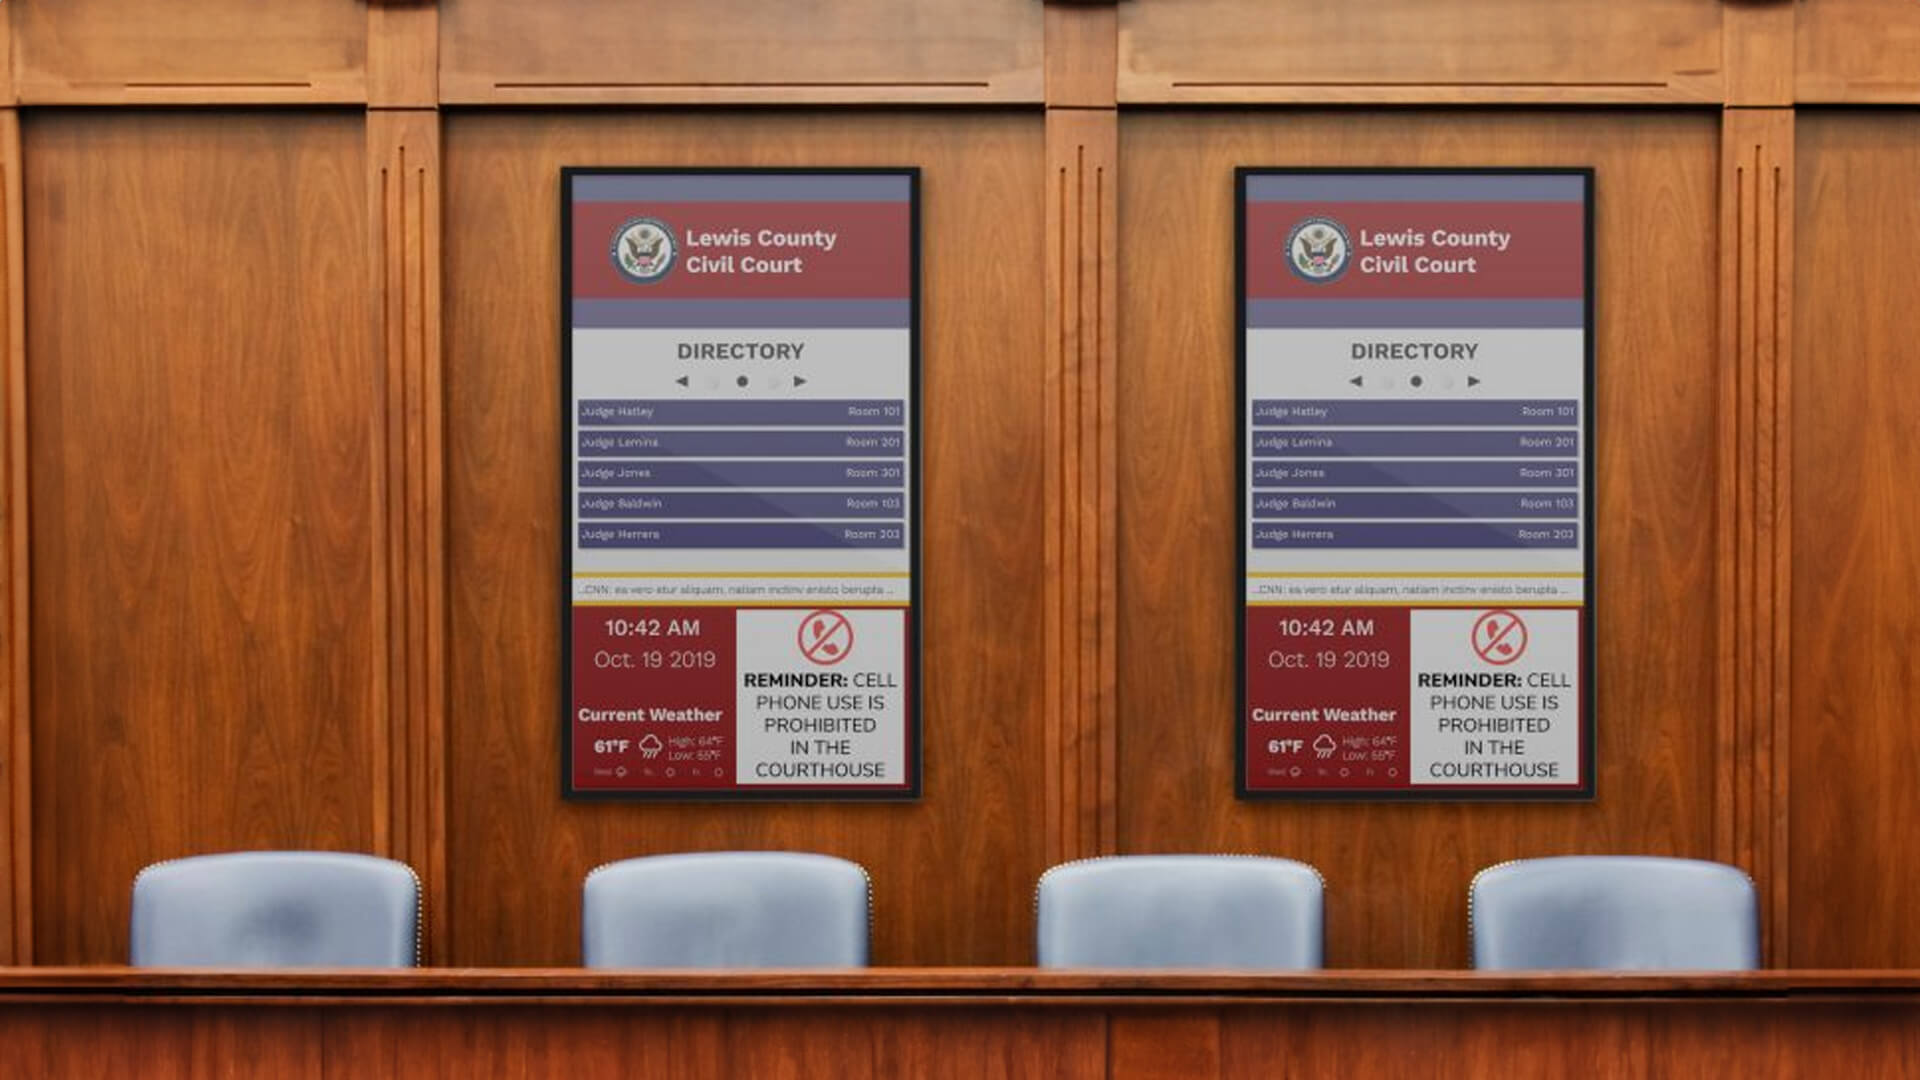 Communication made easy with courtroom digital signage.